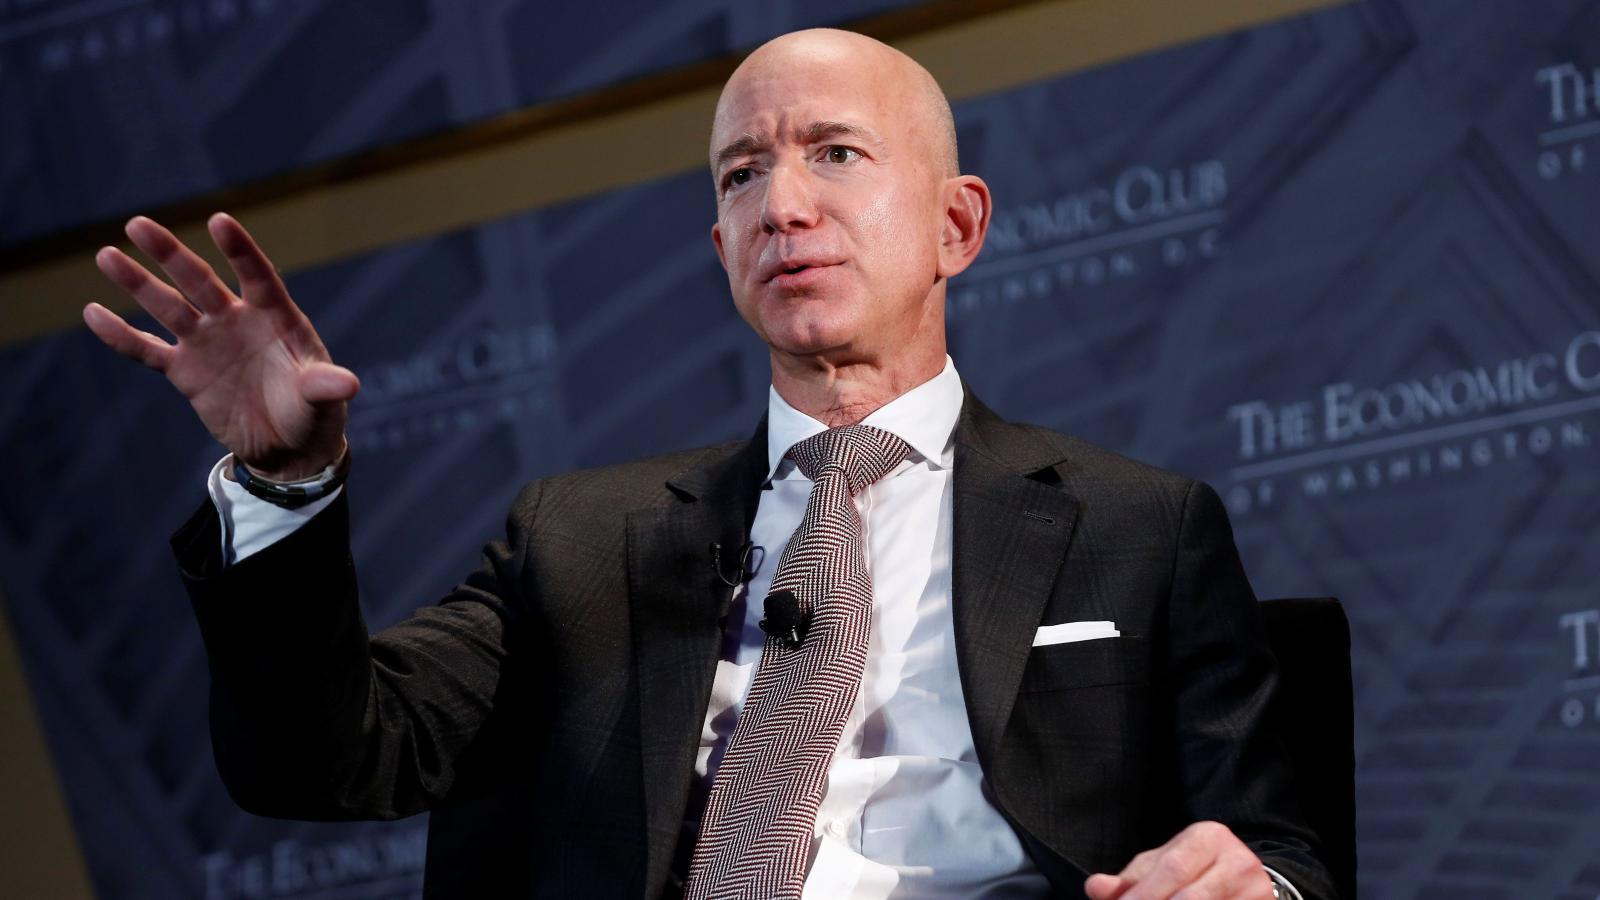 Jeff Bezos only expects himself to make three good decisions a day